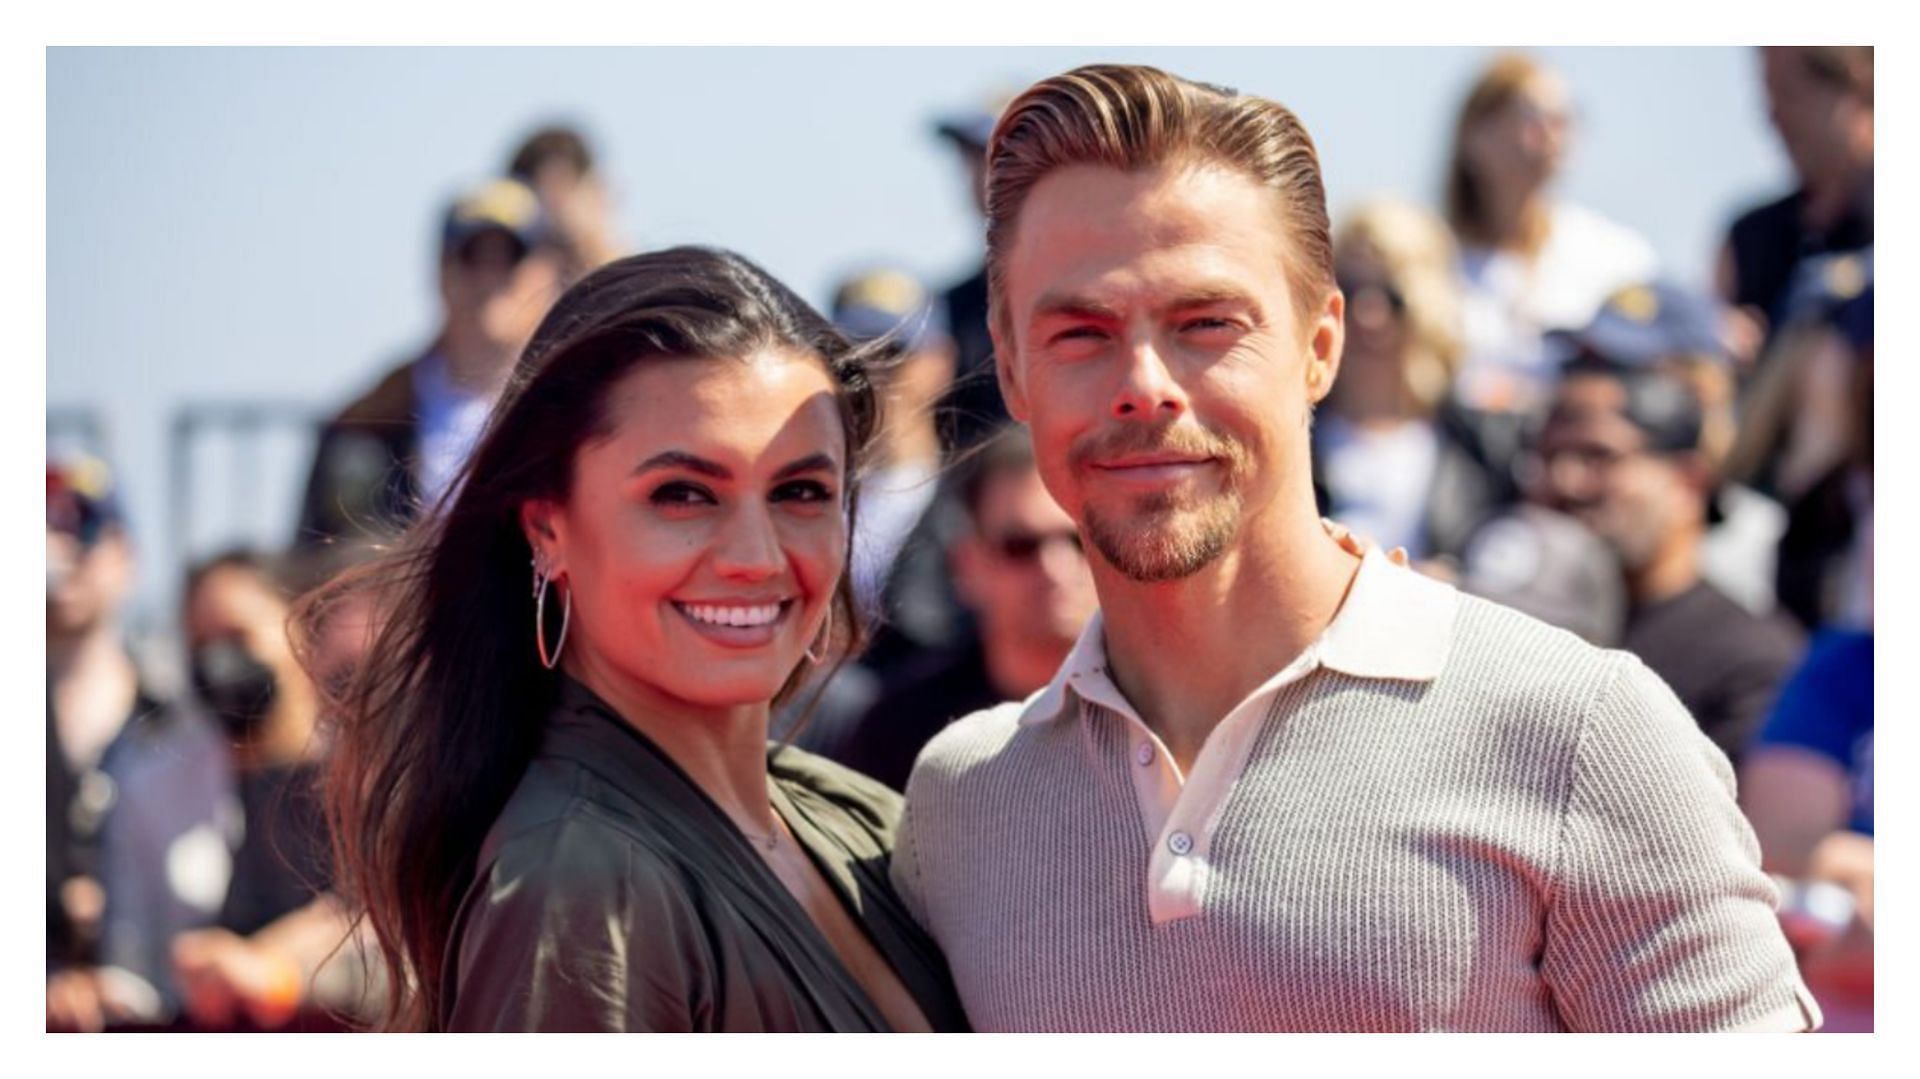 Derek Hough recently announced his engagement to Hayley Erbert (Image via Emma McIntyre/Getty Images)